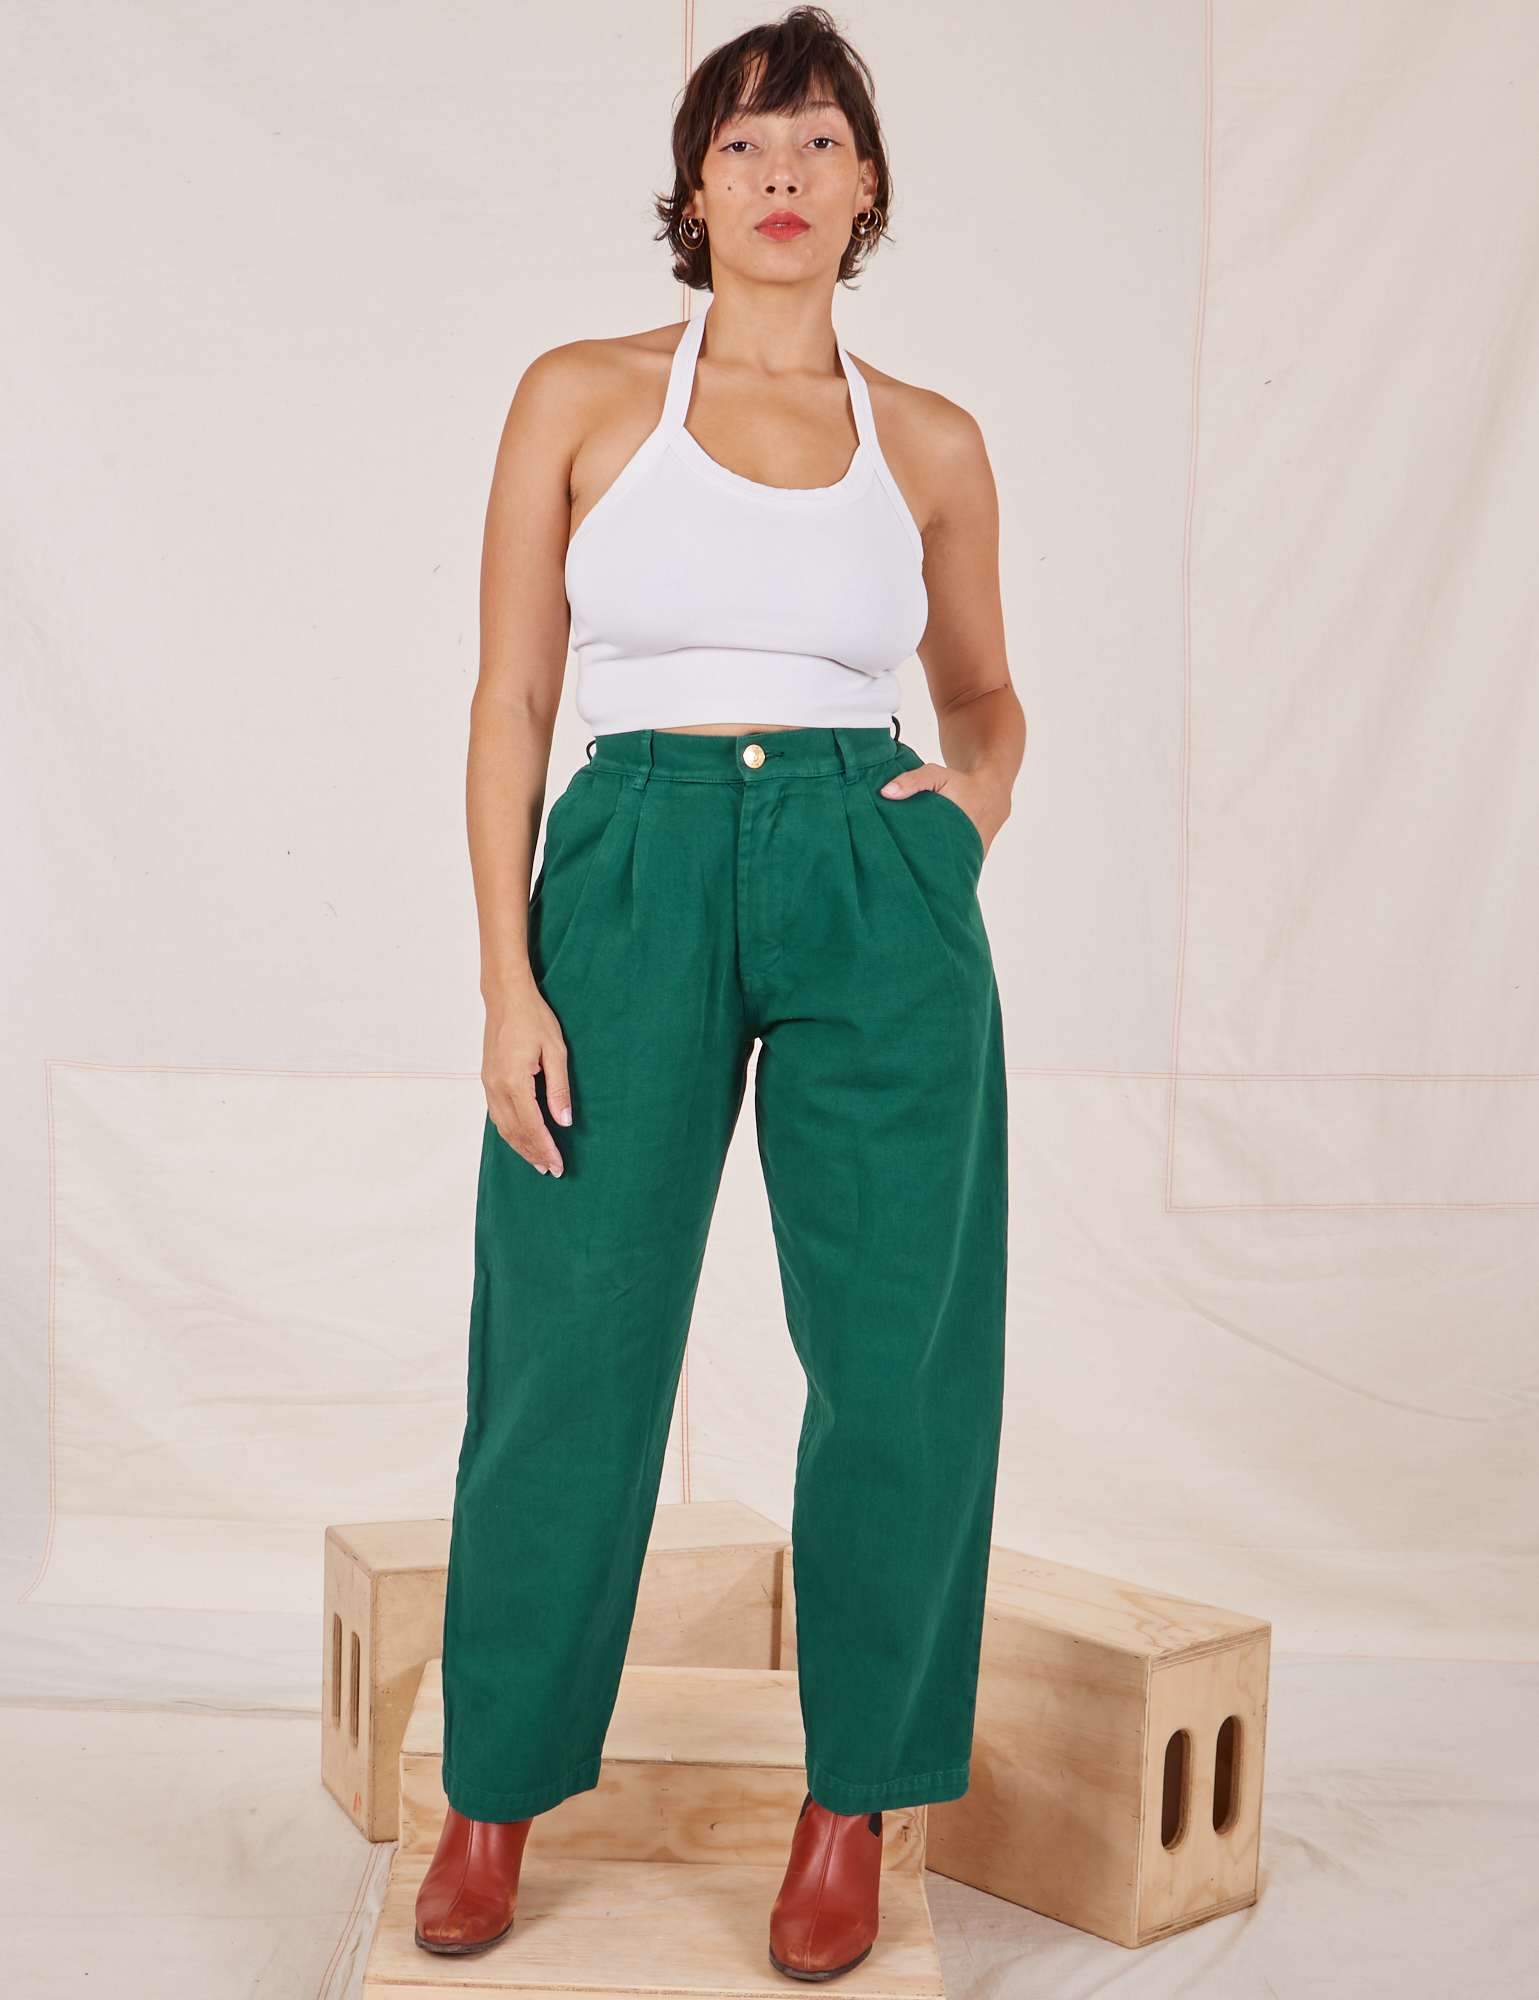 Tiara is 5&#39;4&quot; and wearing XS Heavyweight Trousers in Hunter Green paired with vintage off-white Halter Top